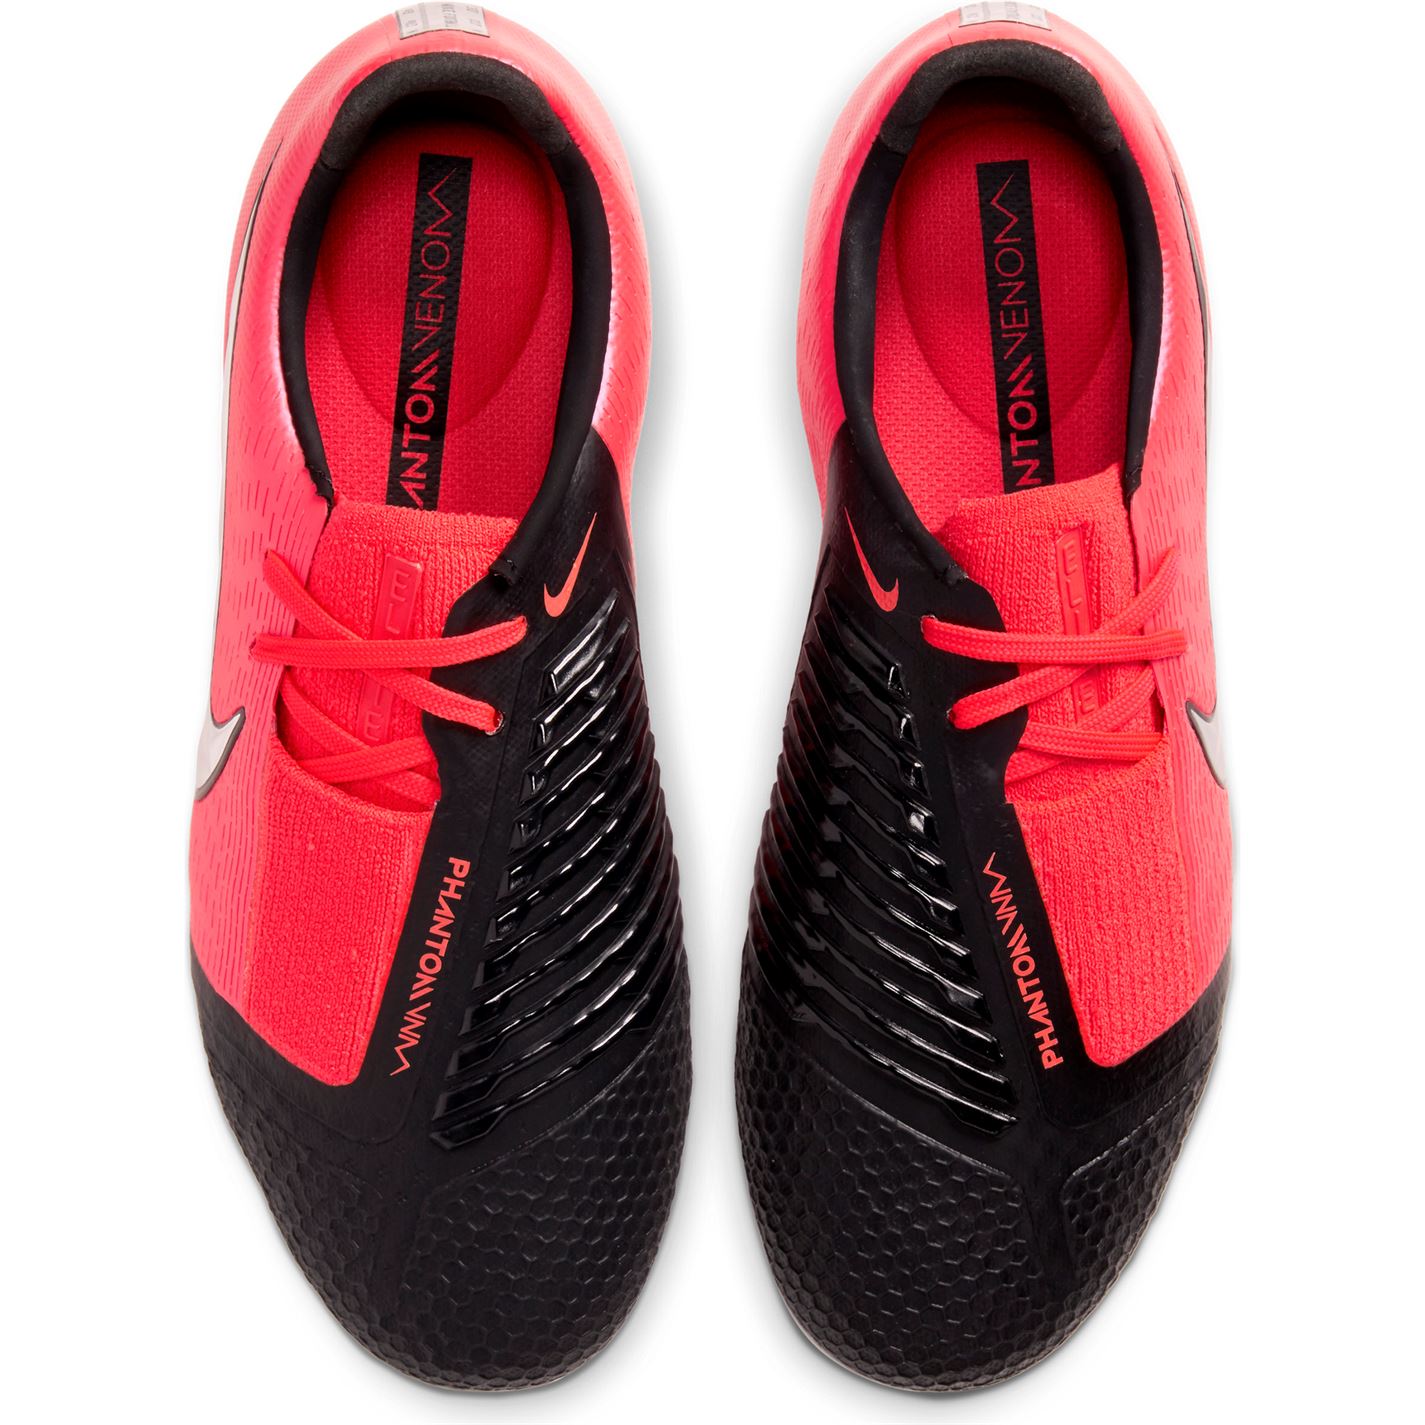 Albums under category 'Nike Phantom VNM' Another Picture Butler Soccer .